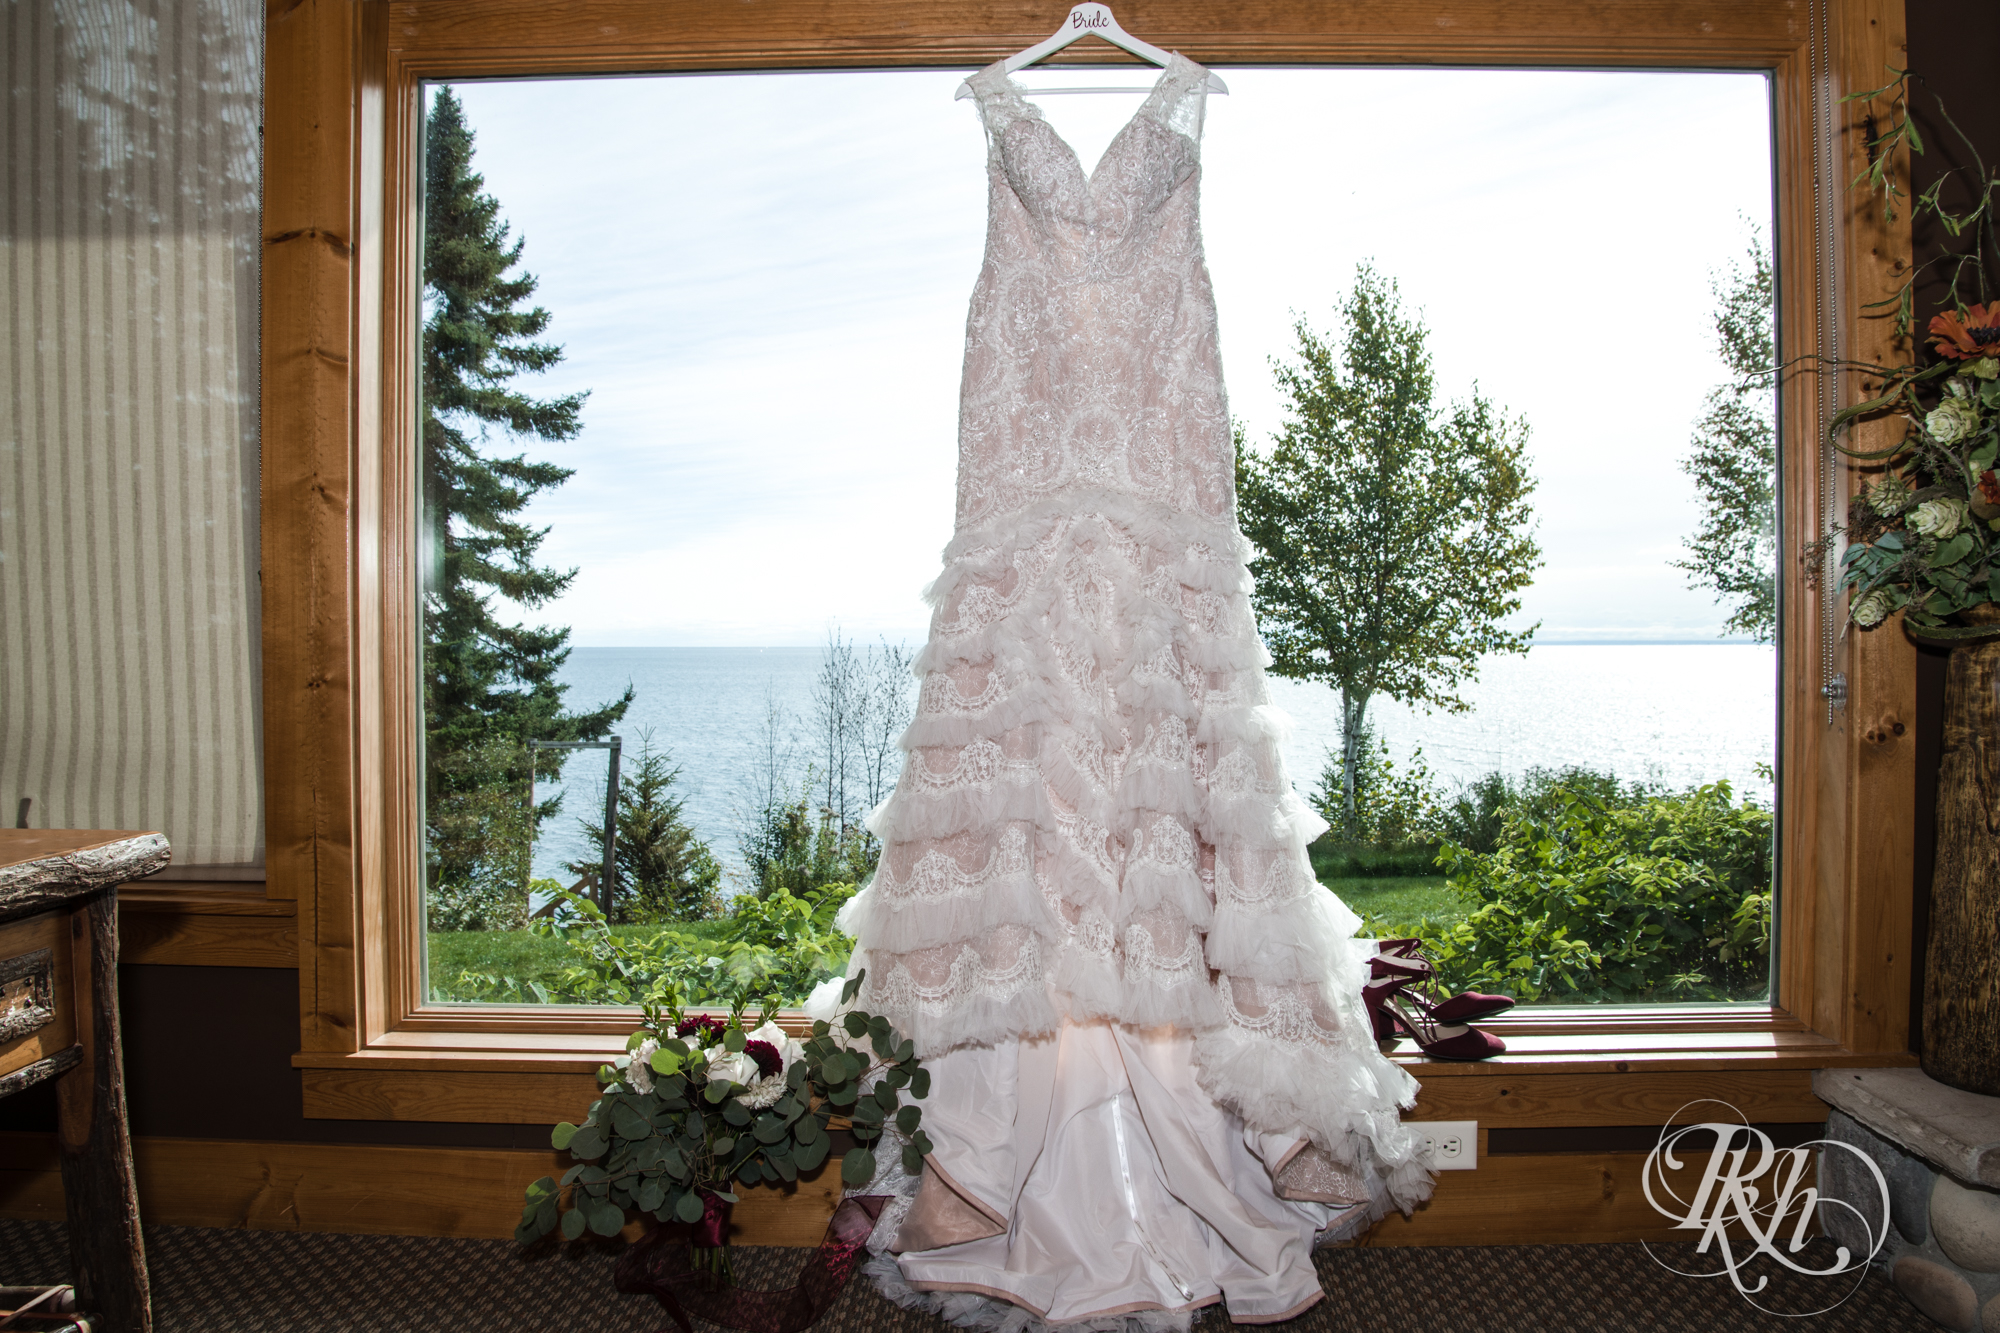 Wedding dress hanging in window at Grand Superior Lodge in Two Harbors, Minnesota.